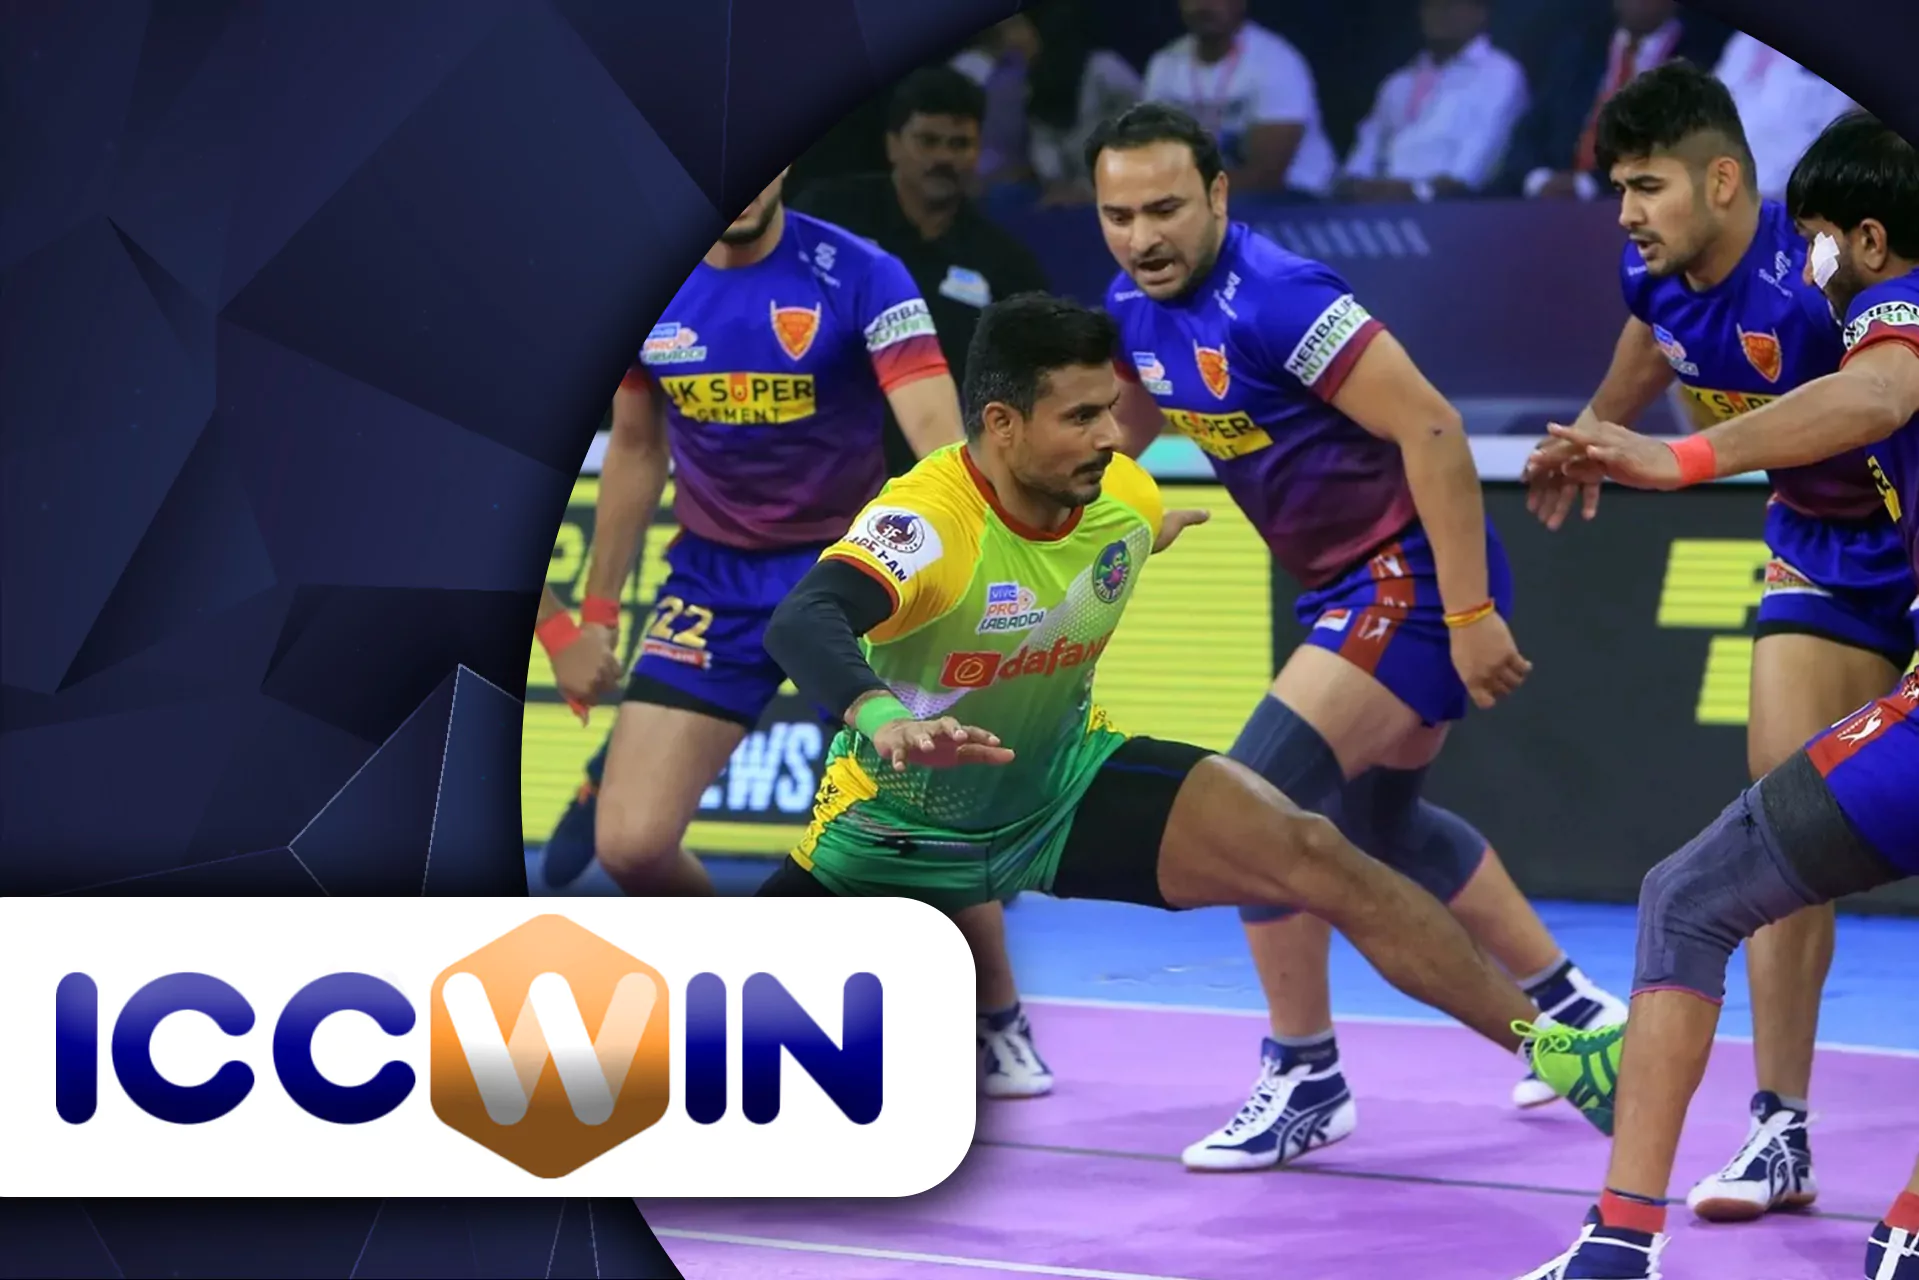 You can also place bets on kabaddi at ICCWIN.